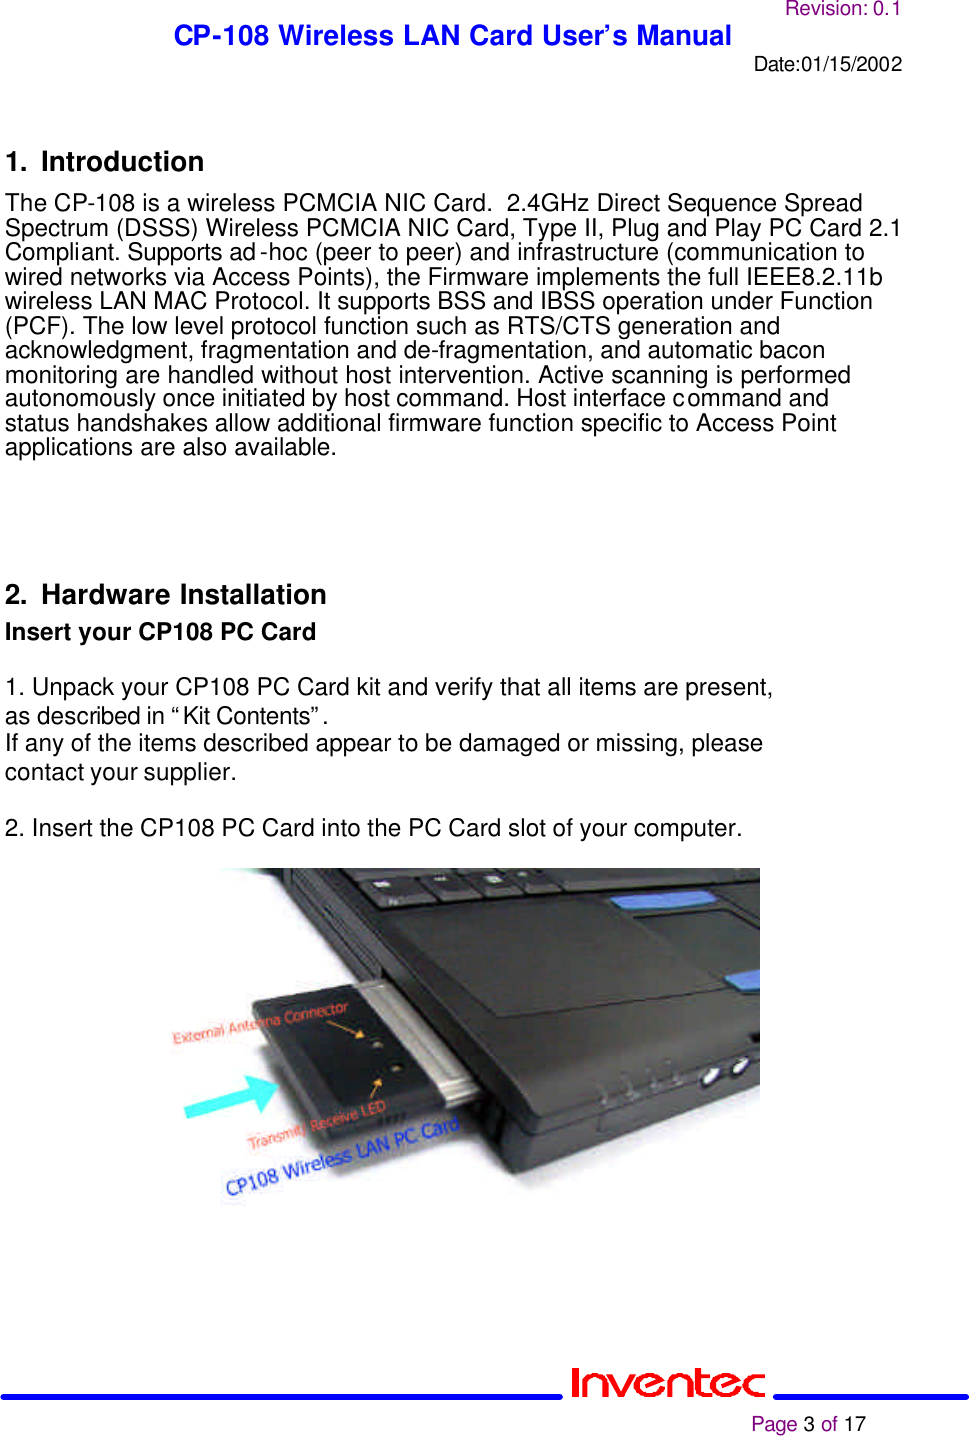 Revision: 0.1 CP-108 Wireless LAN Card User’s Manual Date:01/15/2002                                                                                                                                                             Page 3 of 17   1. Introduction The CP-108 is a wireless PCMCIA NIC Card.  2.4GHz Direct Sequence Spread Spectrum (DSSS) Wireless PCMCIA NIC Card, Type II, Plug and Play PC Card 2.1 Compliant. Supports ad-hoc (peer to peer) and infrastructure (communication to wired networks via Access Points), the Firmware implements the full IEEE8.2.11b wireless LAN MAC Protocol. It supports BSS and IBSS operation under Function (PCF). The low level protocol function such as RTS/CTS generation and acknowledgment, fragmentation and de-fragmentation, and automatic bacon monitoring are handled without host intervention. Active scanning is performed autonomously once initiated by host command. Host interface command and status handshakes allow additional firmware function specific to Access Point applications are also available.    2. Hardware Installation Insert your CP108 PC Card 2  1. Unpack your CP108 PC Card kit and verify that all items are present, as described in “Kit Contents”. If any of the items described appear to be damaged or missing, please contact your supplier.  2. Insert the CP108 PC Card into the PC Card slot of your computer.    